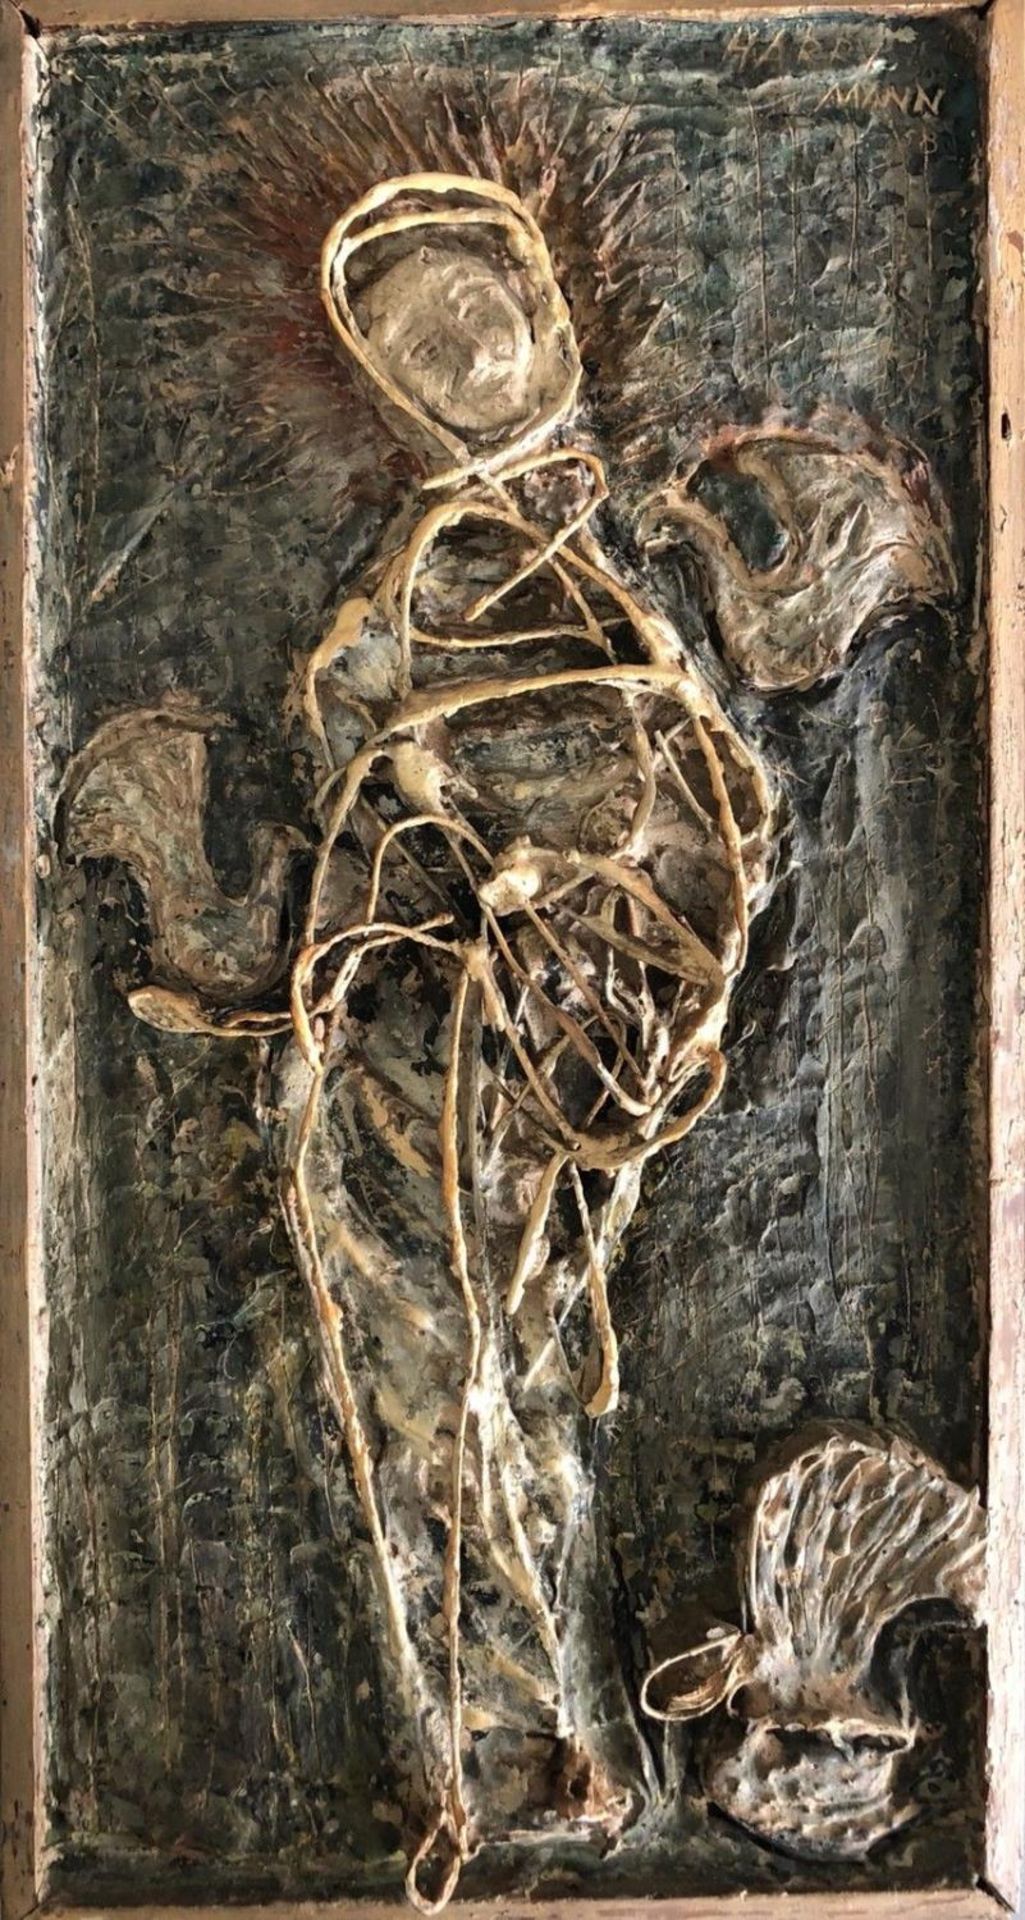 Harry Mann, British mid 20th century, painted plaster, wire and wood relief. Signed and dated 1958.